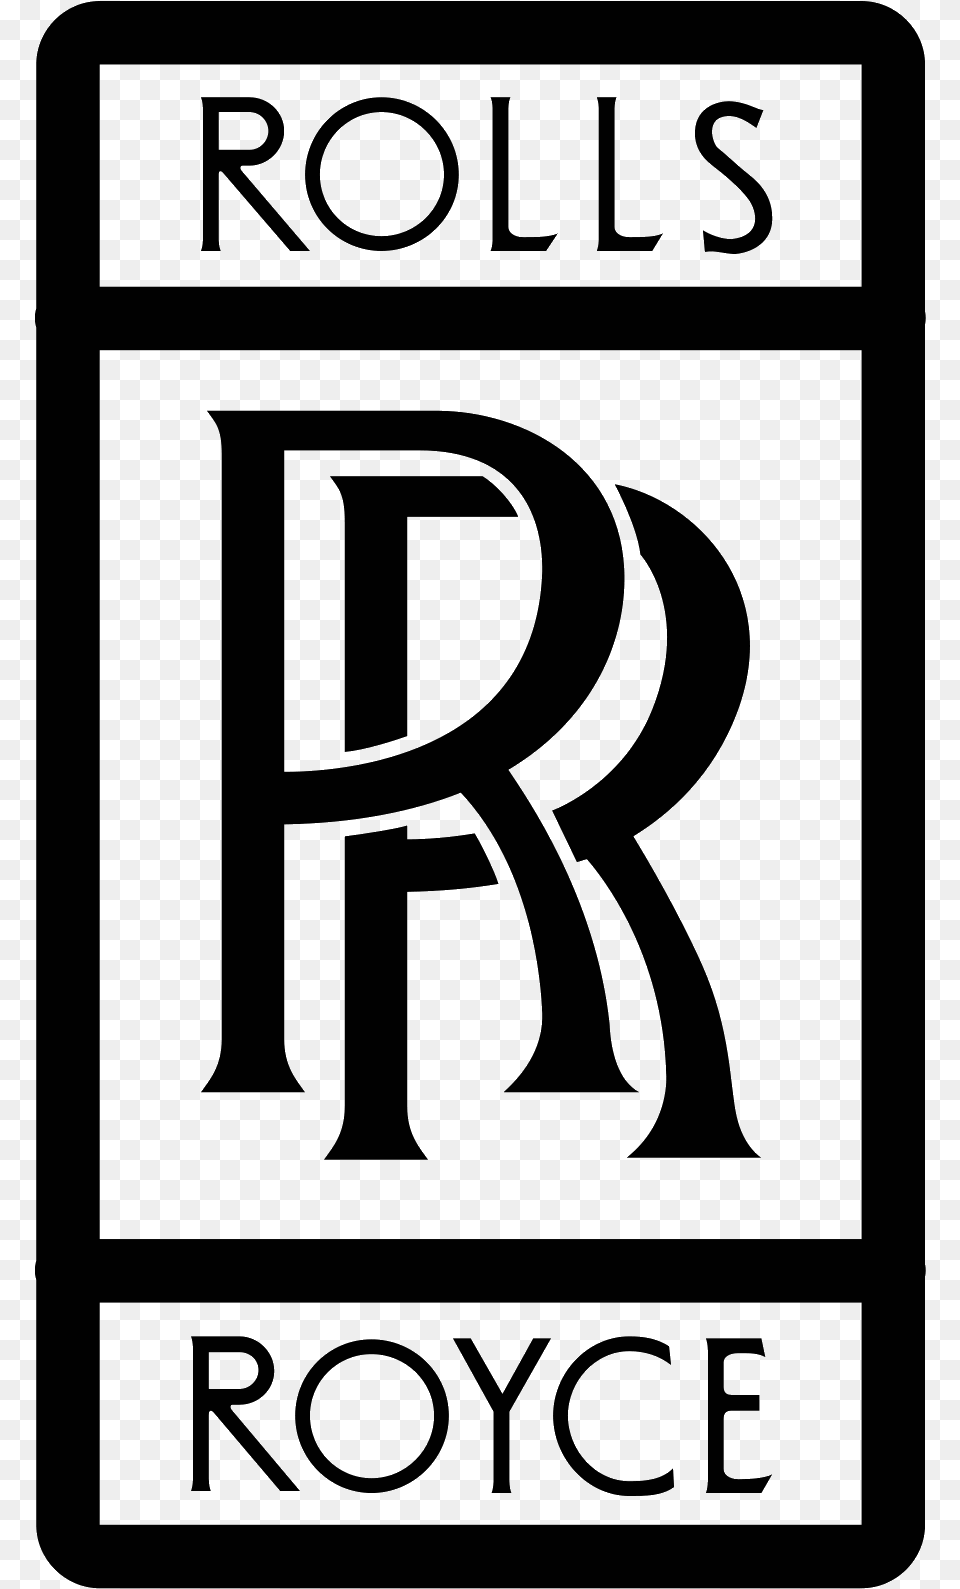 Rolls Royce Icon This Is A Logo It Has Vertical Rectangle Rolls Royce Logo Black And White, Gray Free Transparent Png